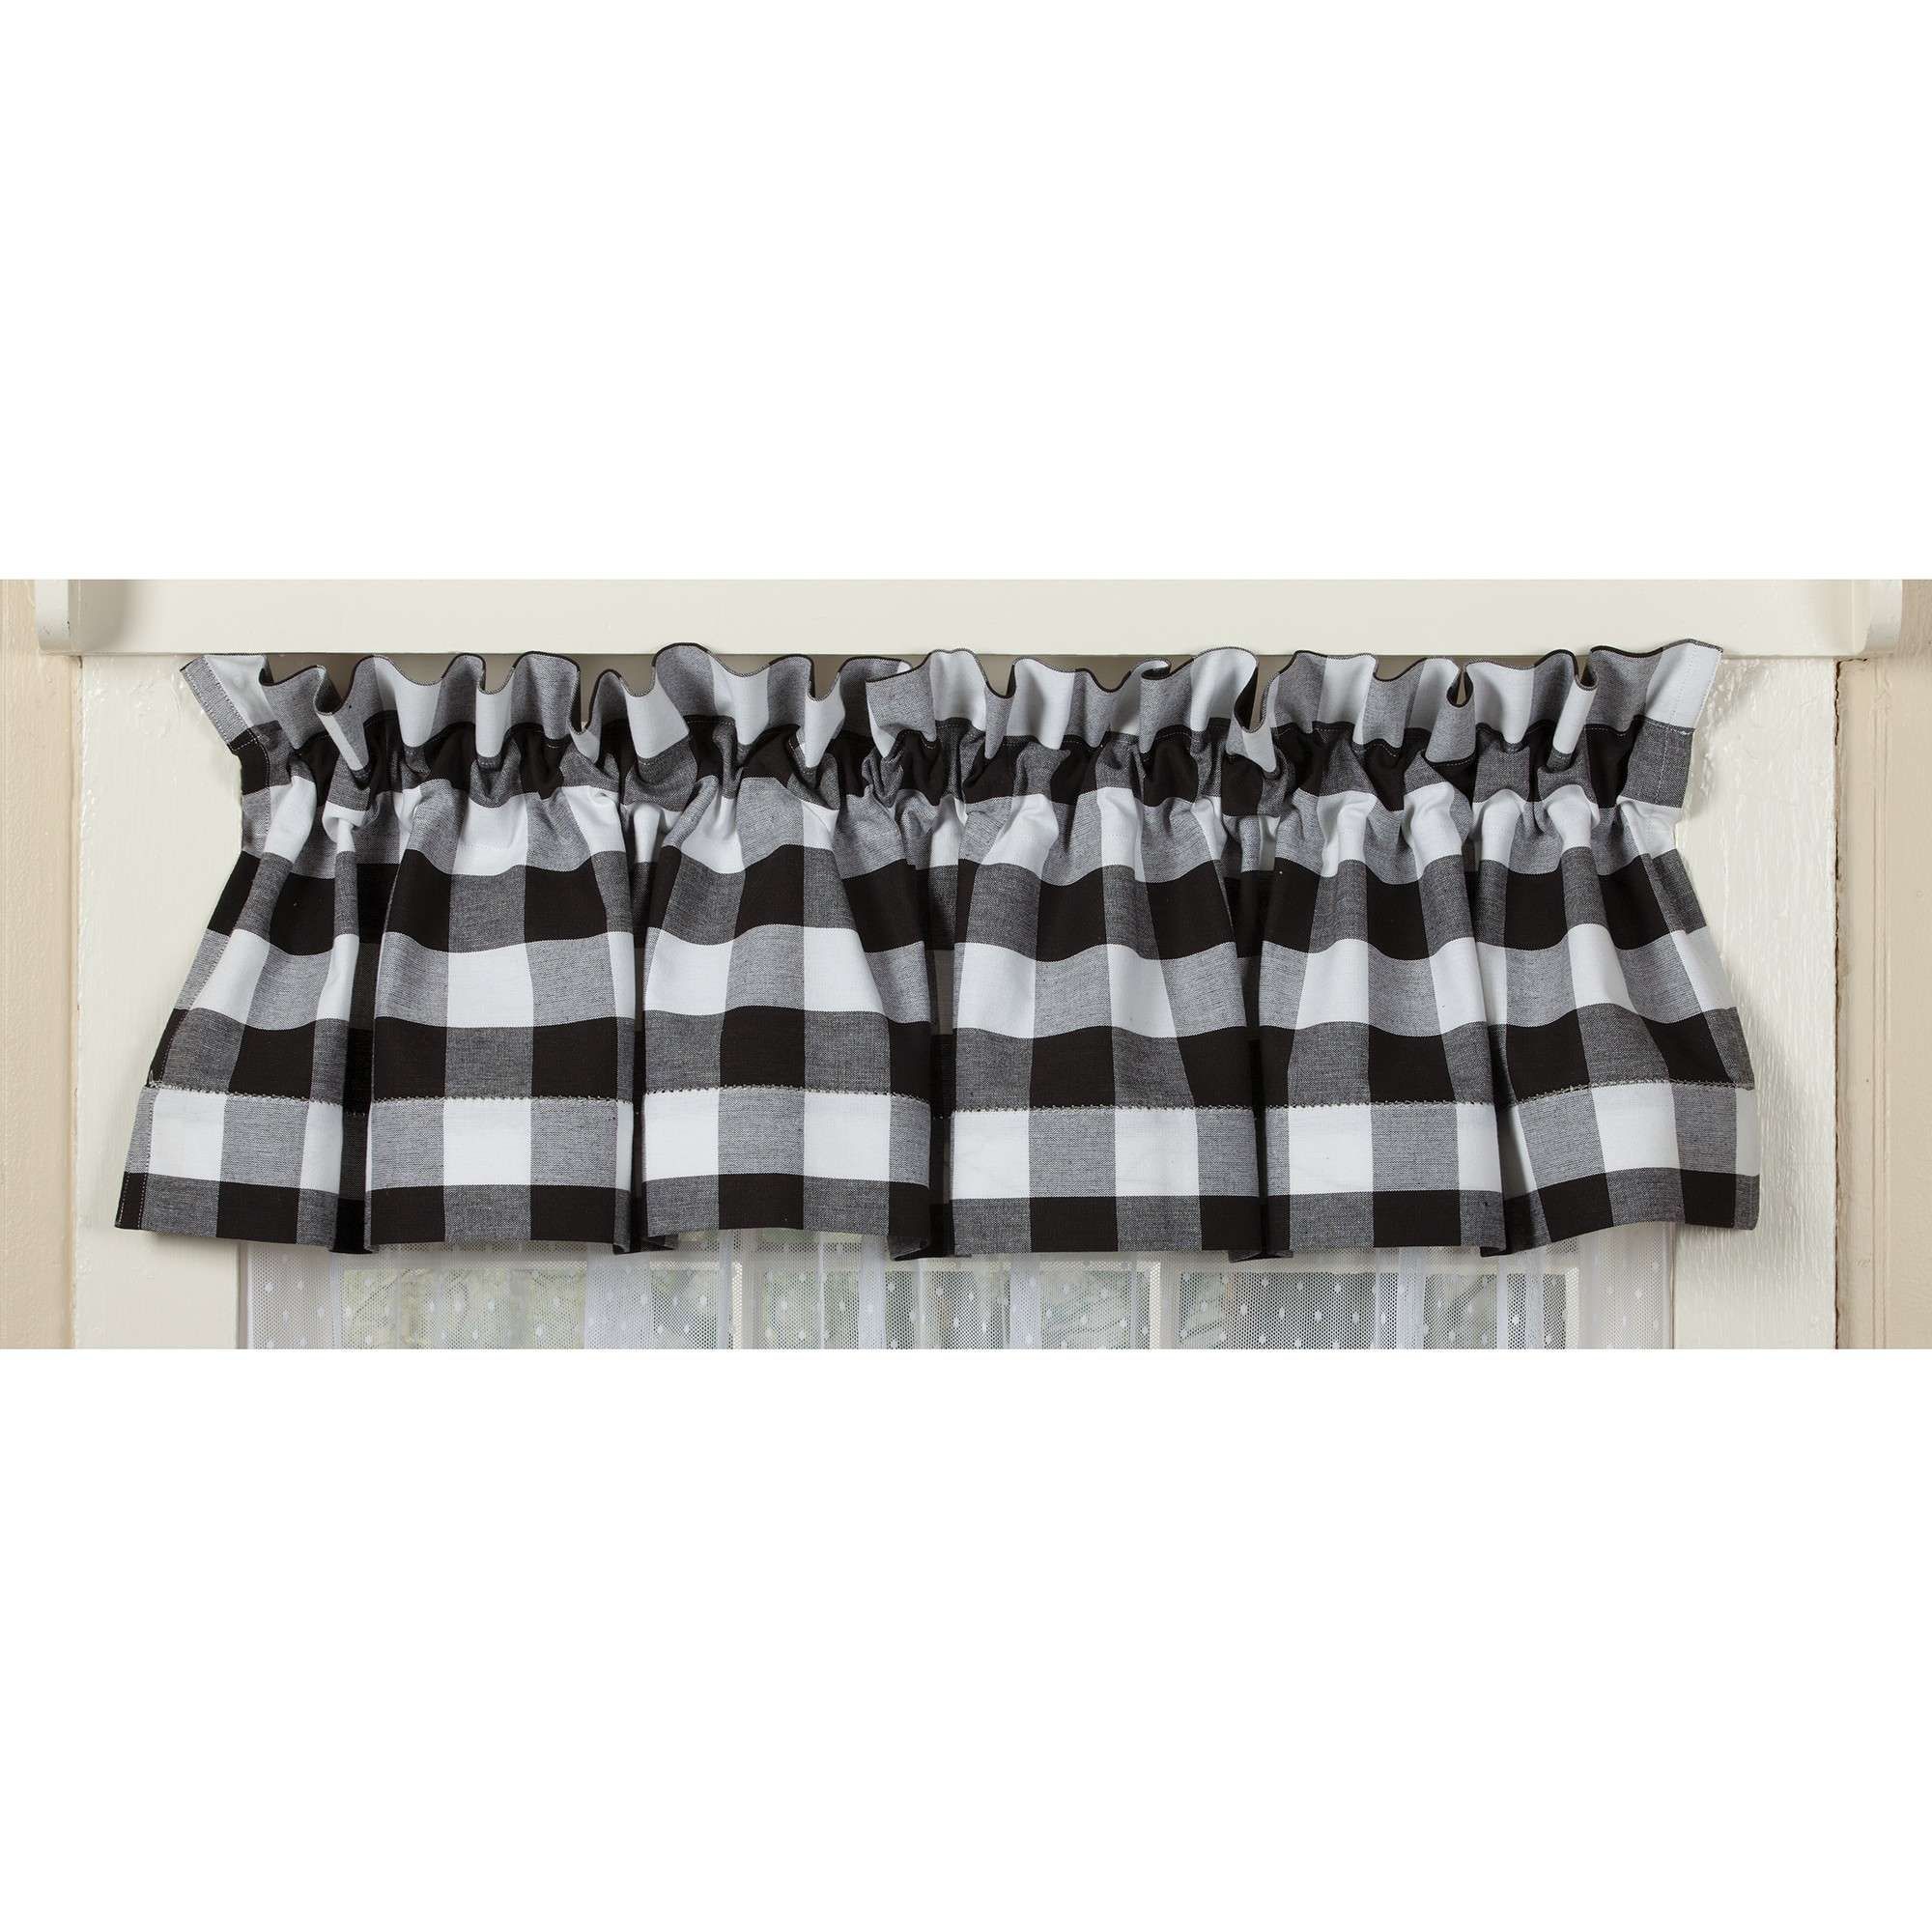 Alluring Black And White Checkered Kitchen Valance Valances Pertaining To Farmhouse Stripe Kitchen Tier Pairs (View 6 of 20)